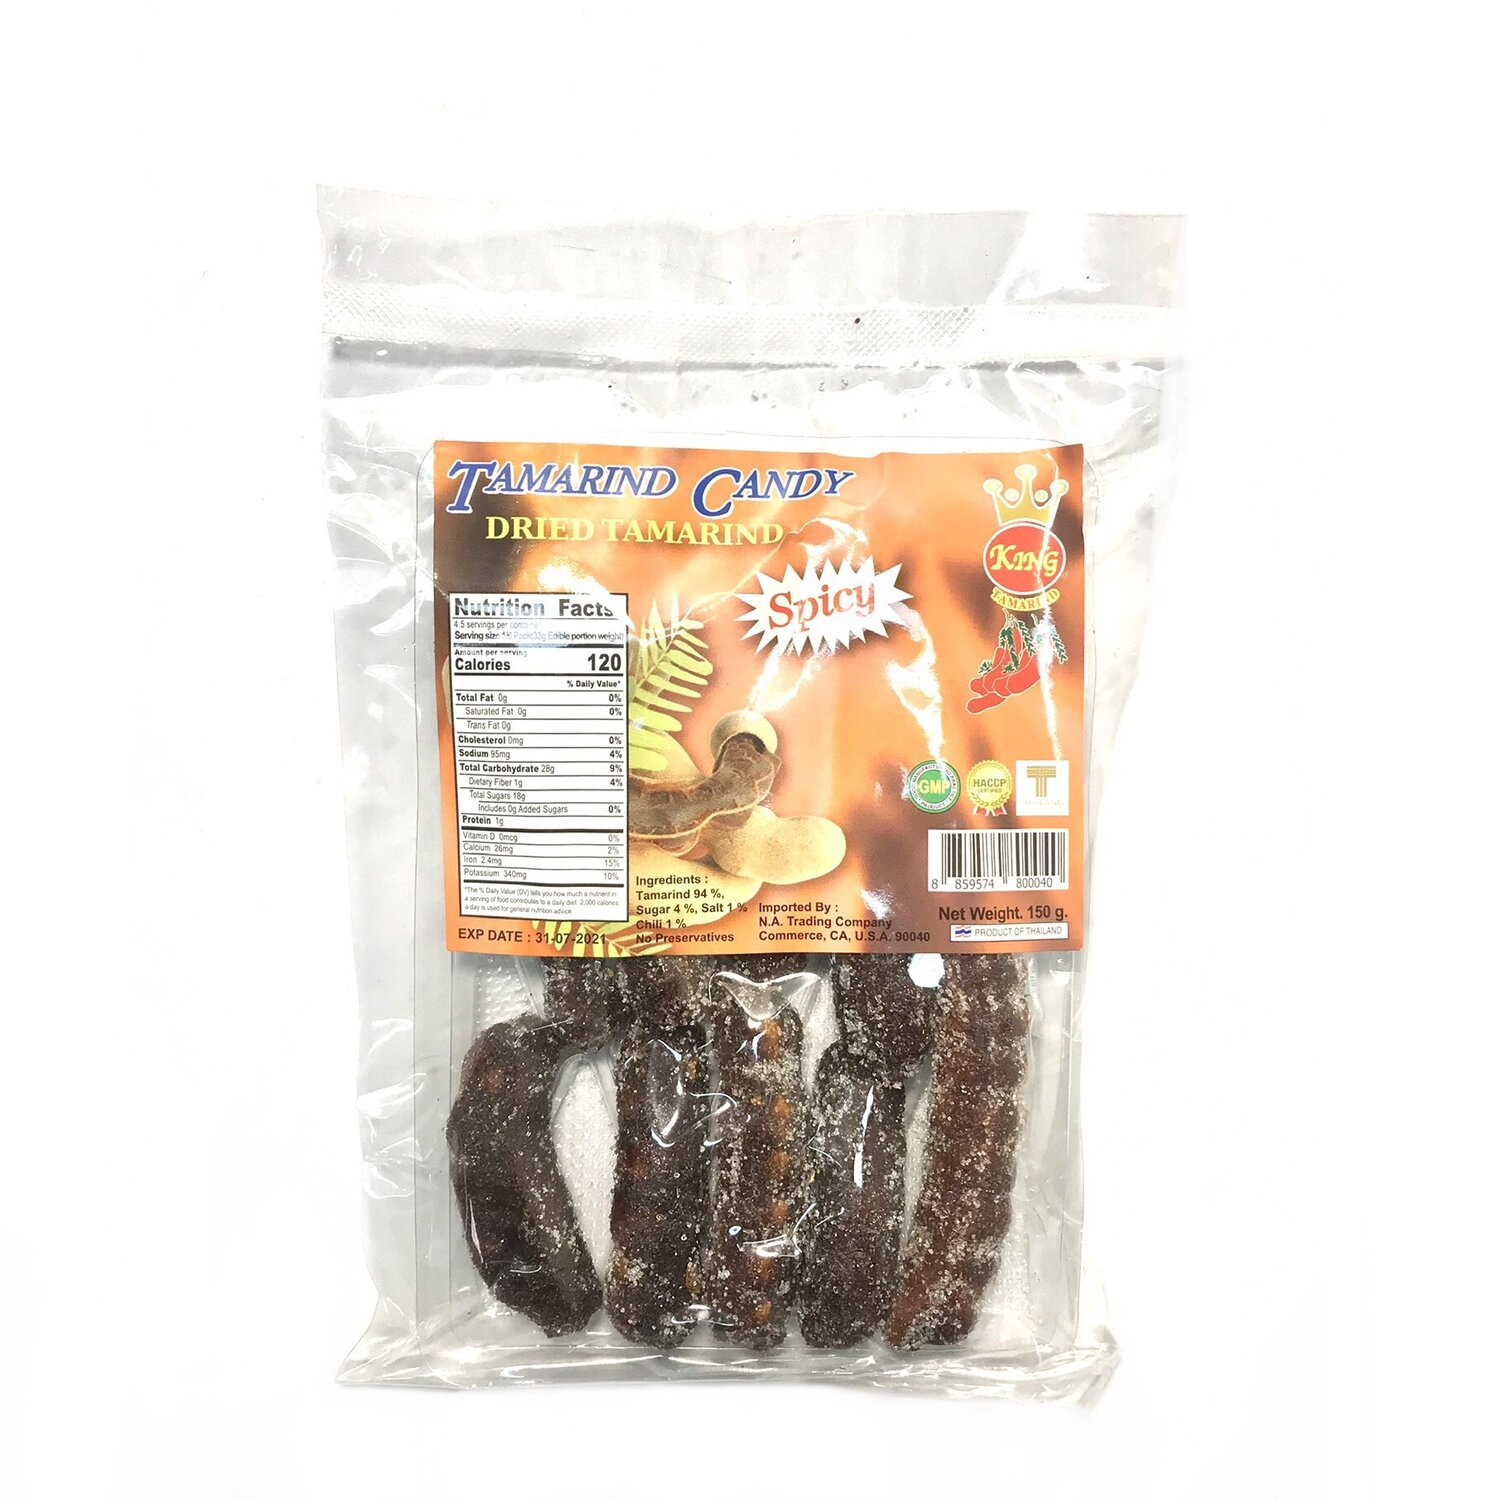 King Brand Tamarind Candy Spicy Hong Thai Foods Corp